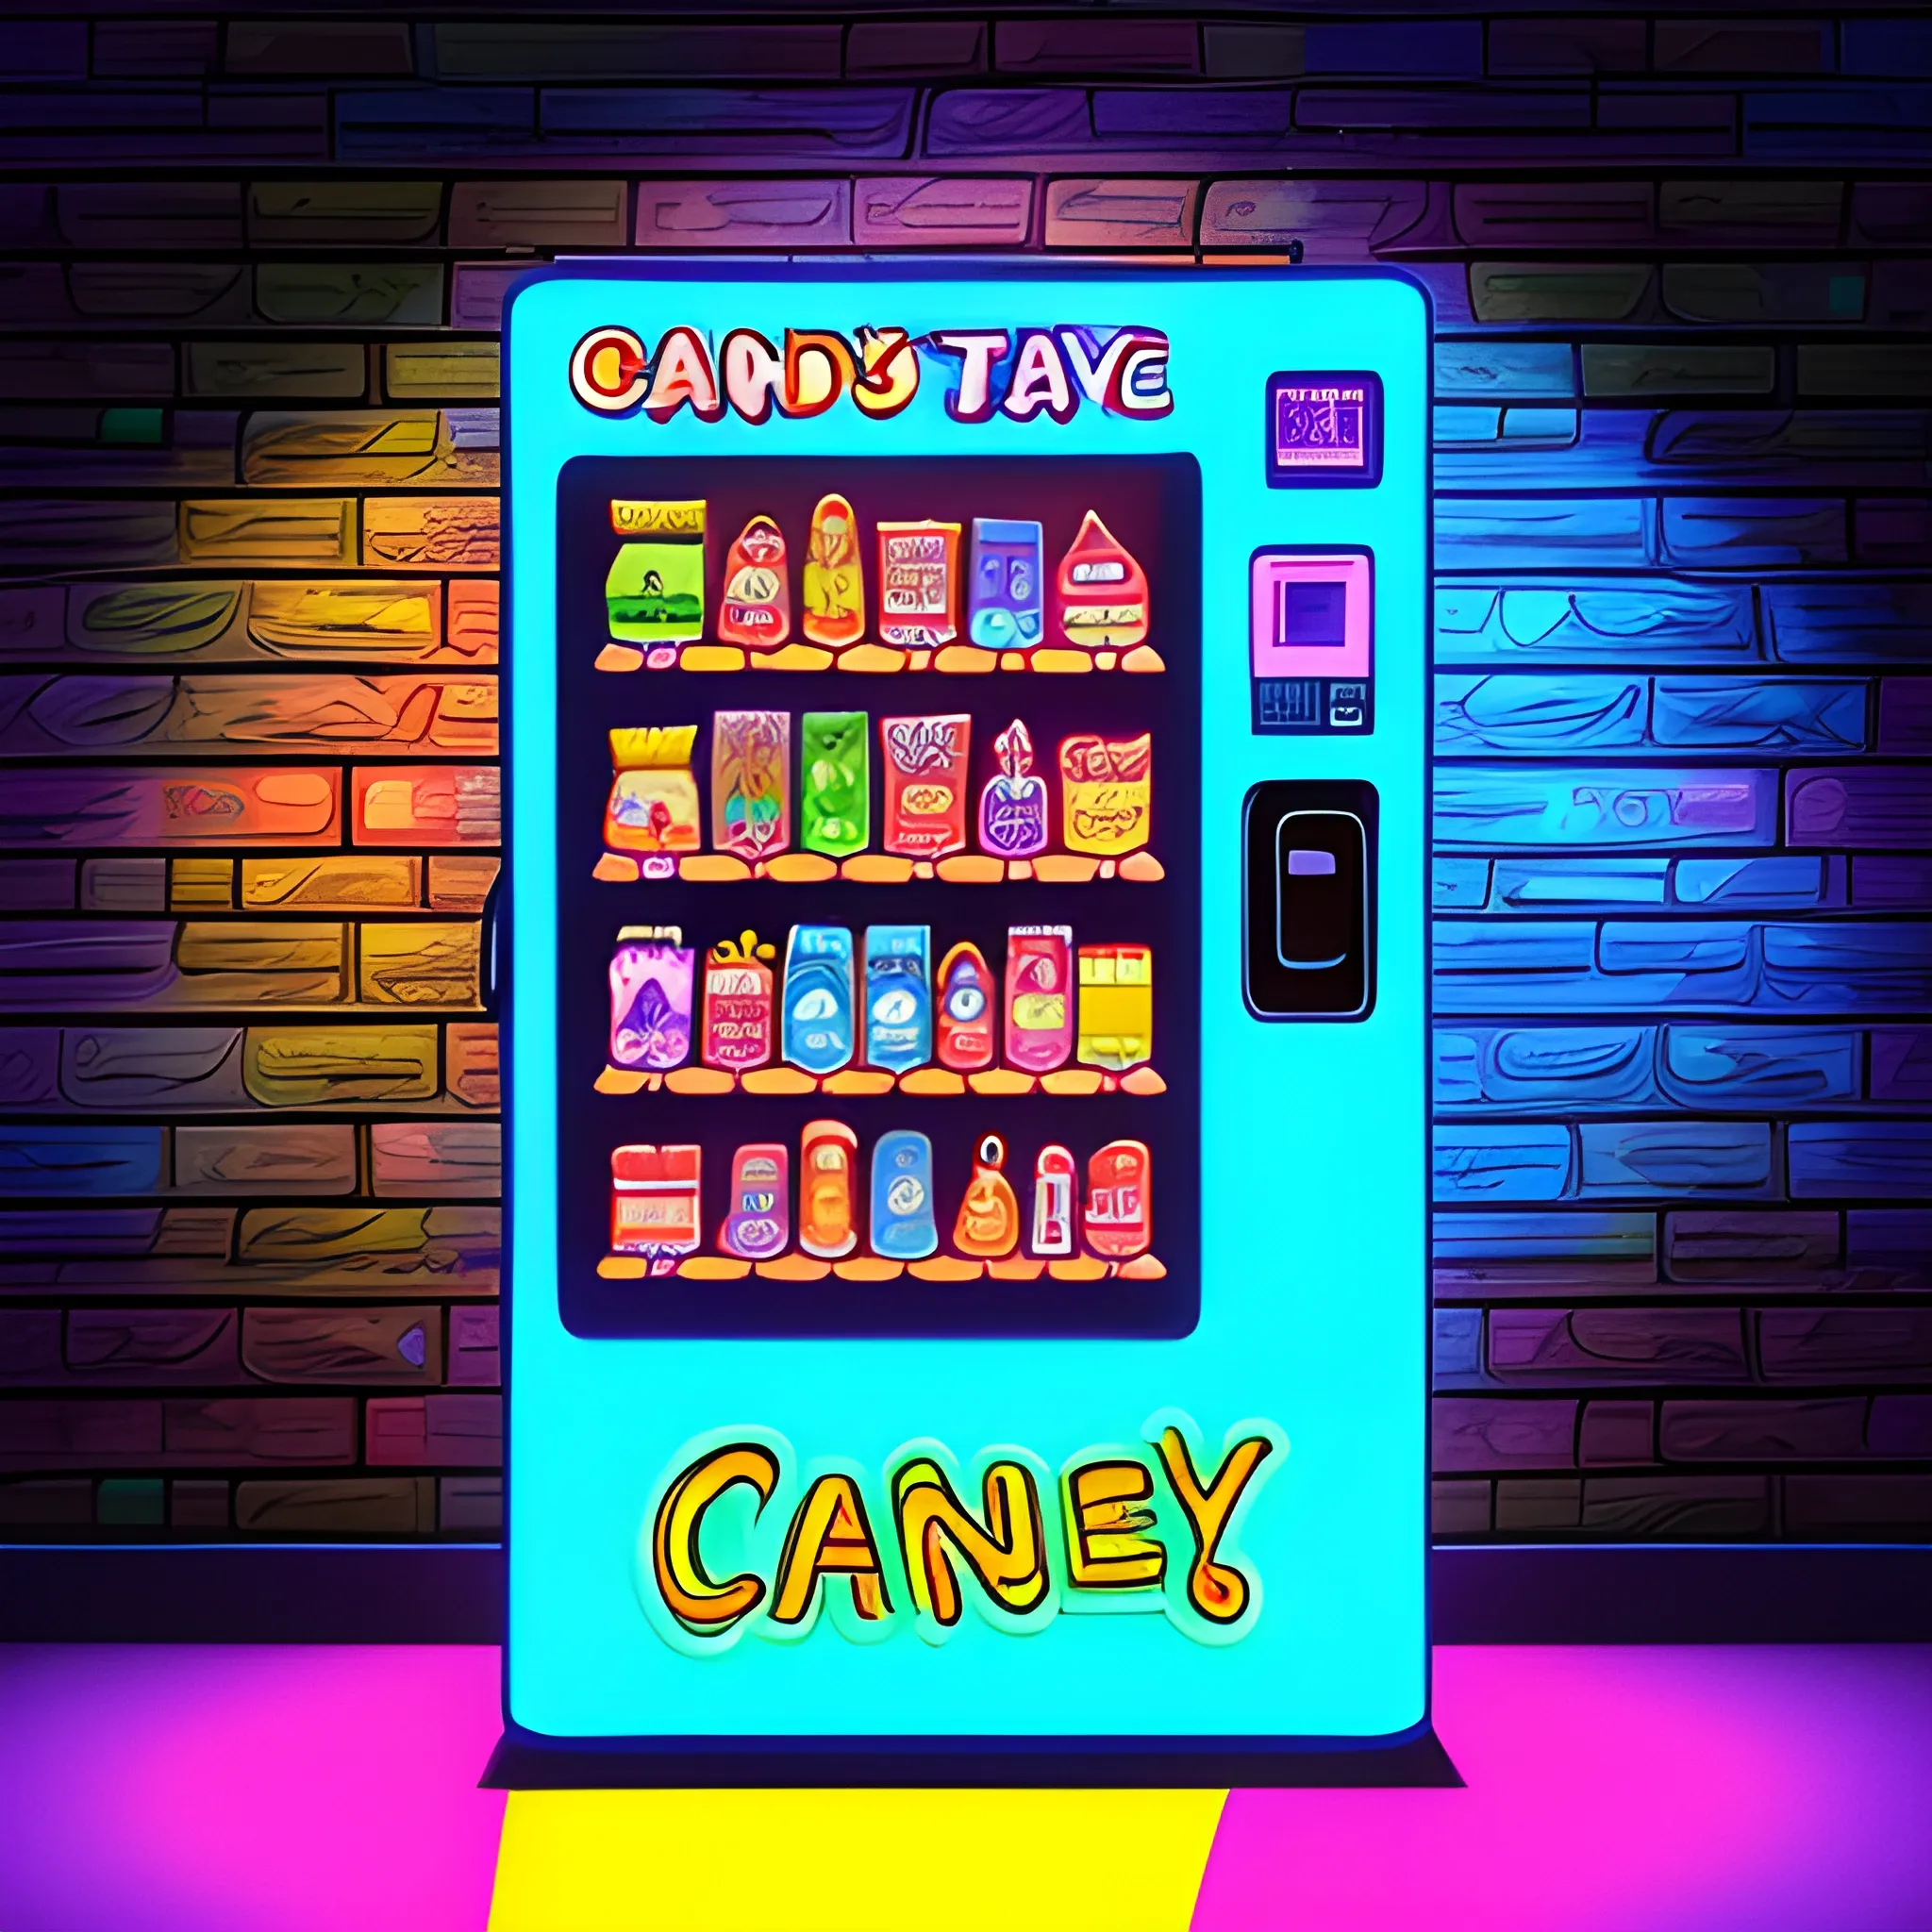 vending machine with candy, drinks, toys in a digital drawing style with neon lights, camera at an angle, wooden wall background and a window on the side., Cartoon